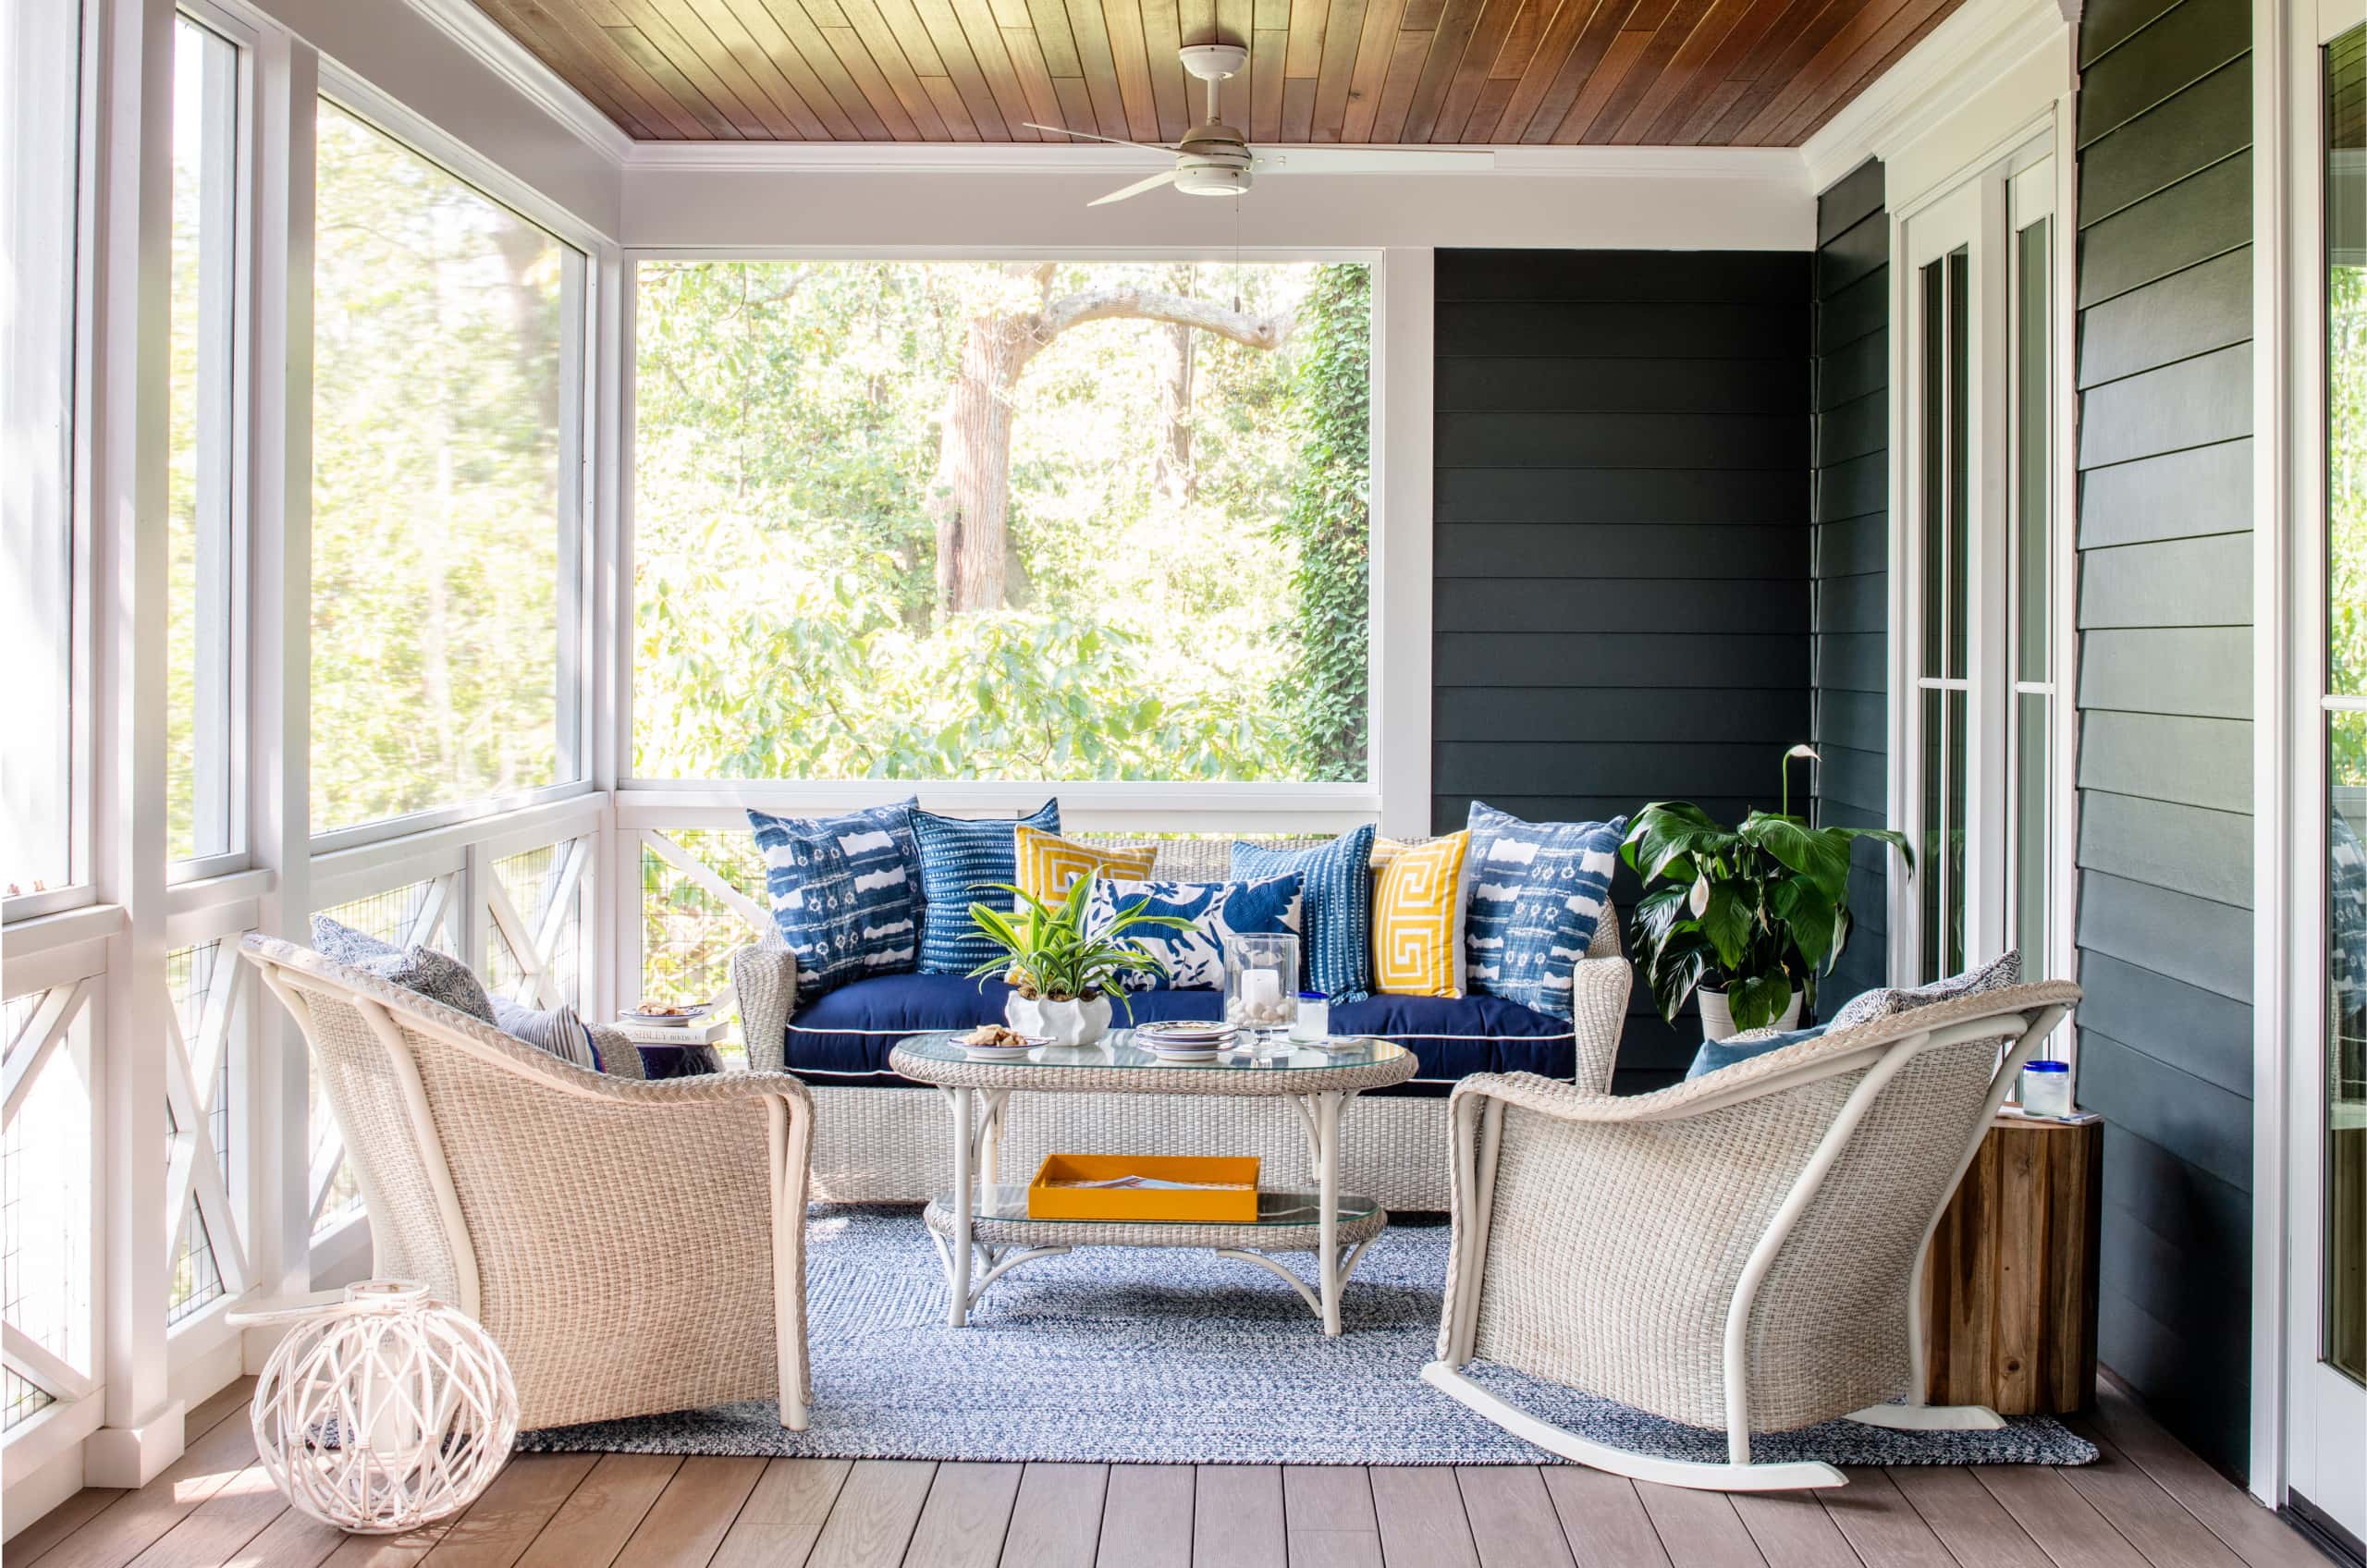 example of coastal inspired home design porch